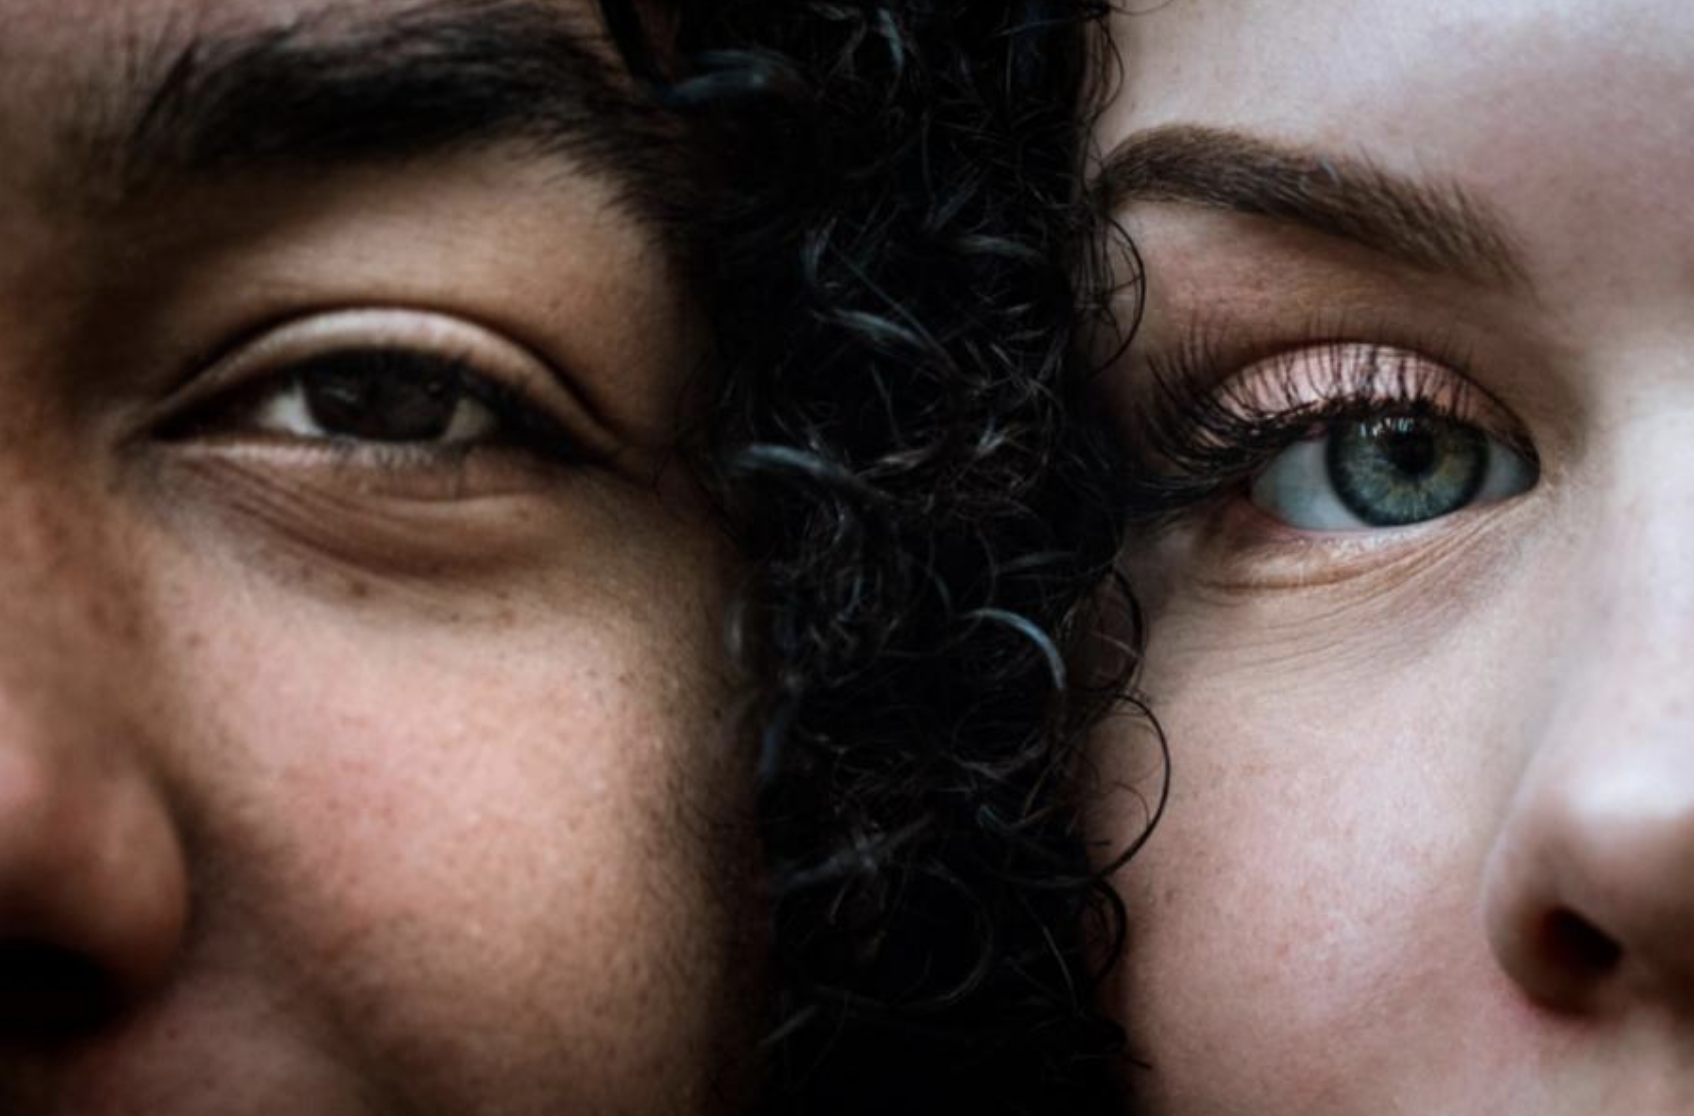 A close up image of the faces of two young people of color